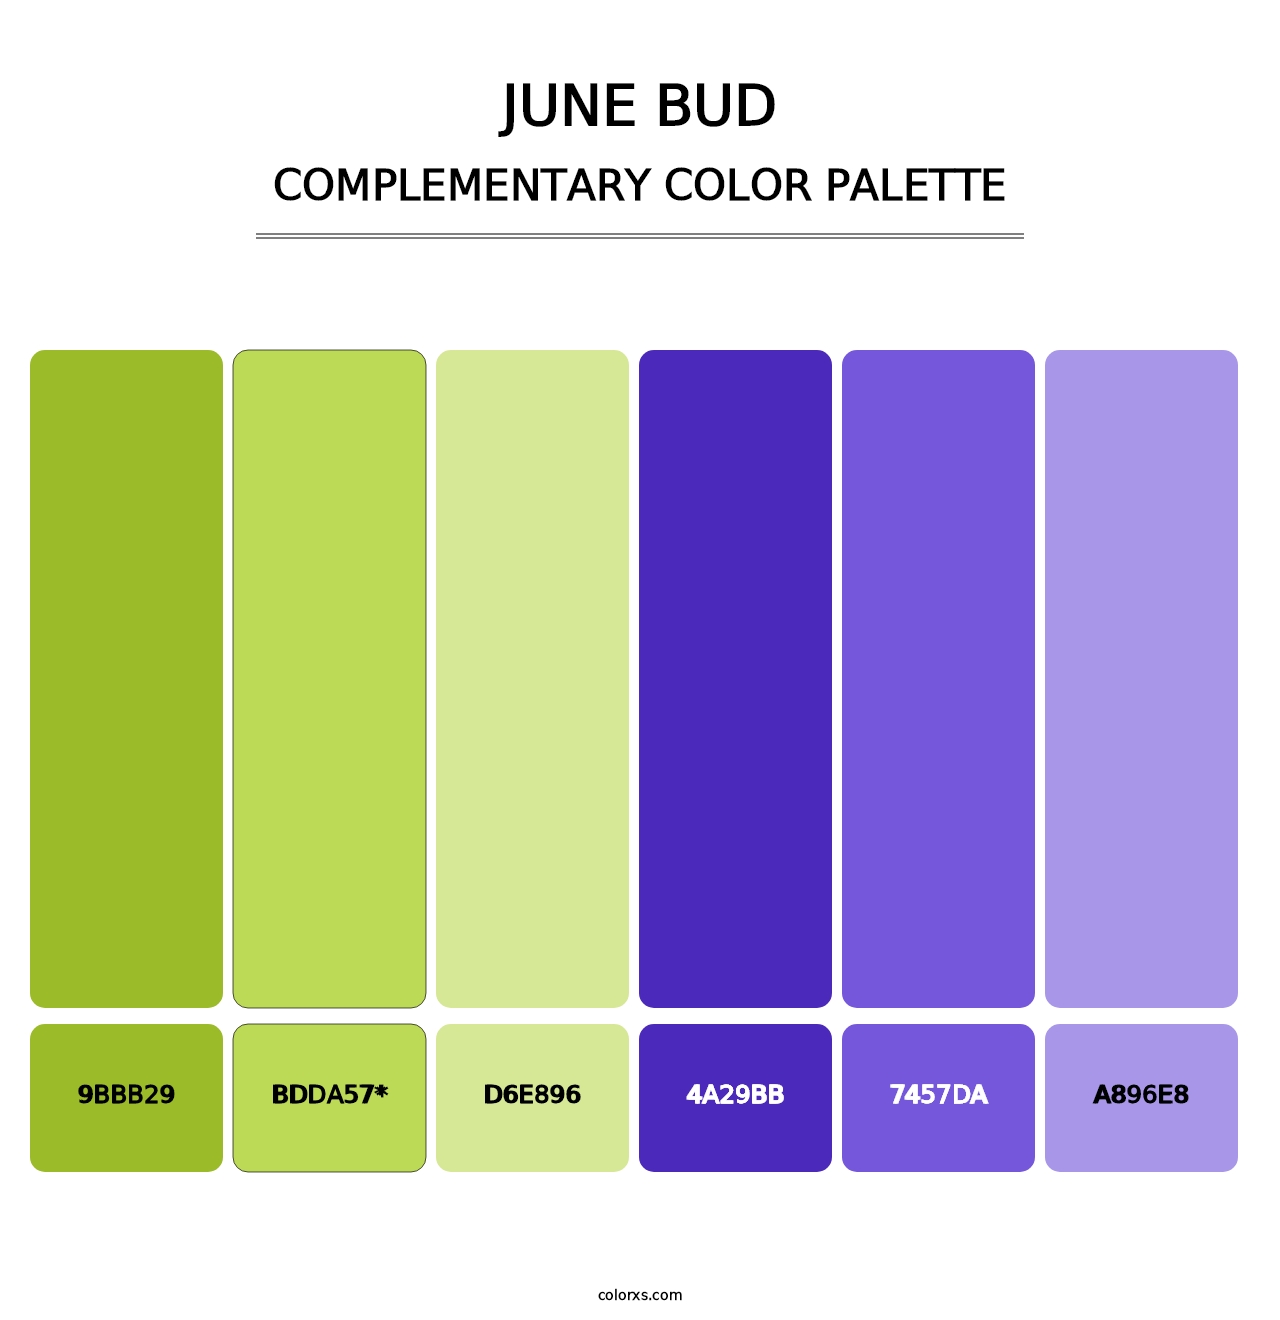 June Bud - Complementary Color Palette